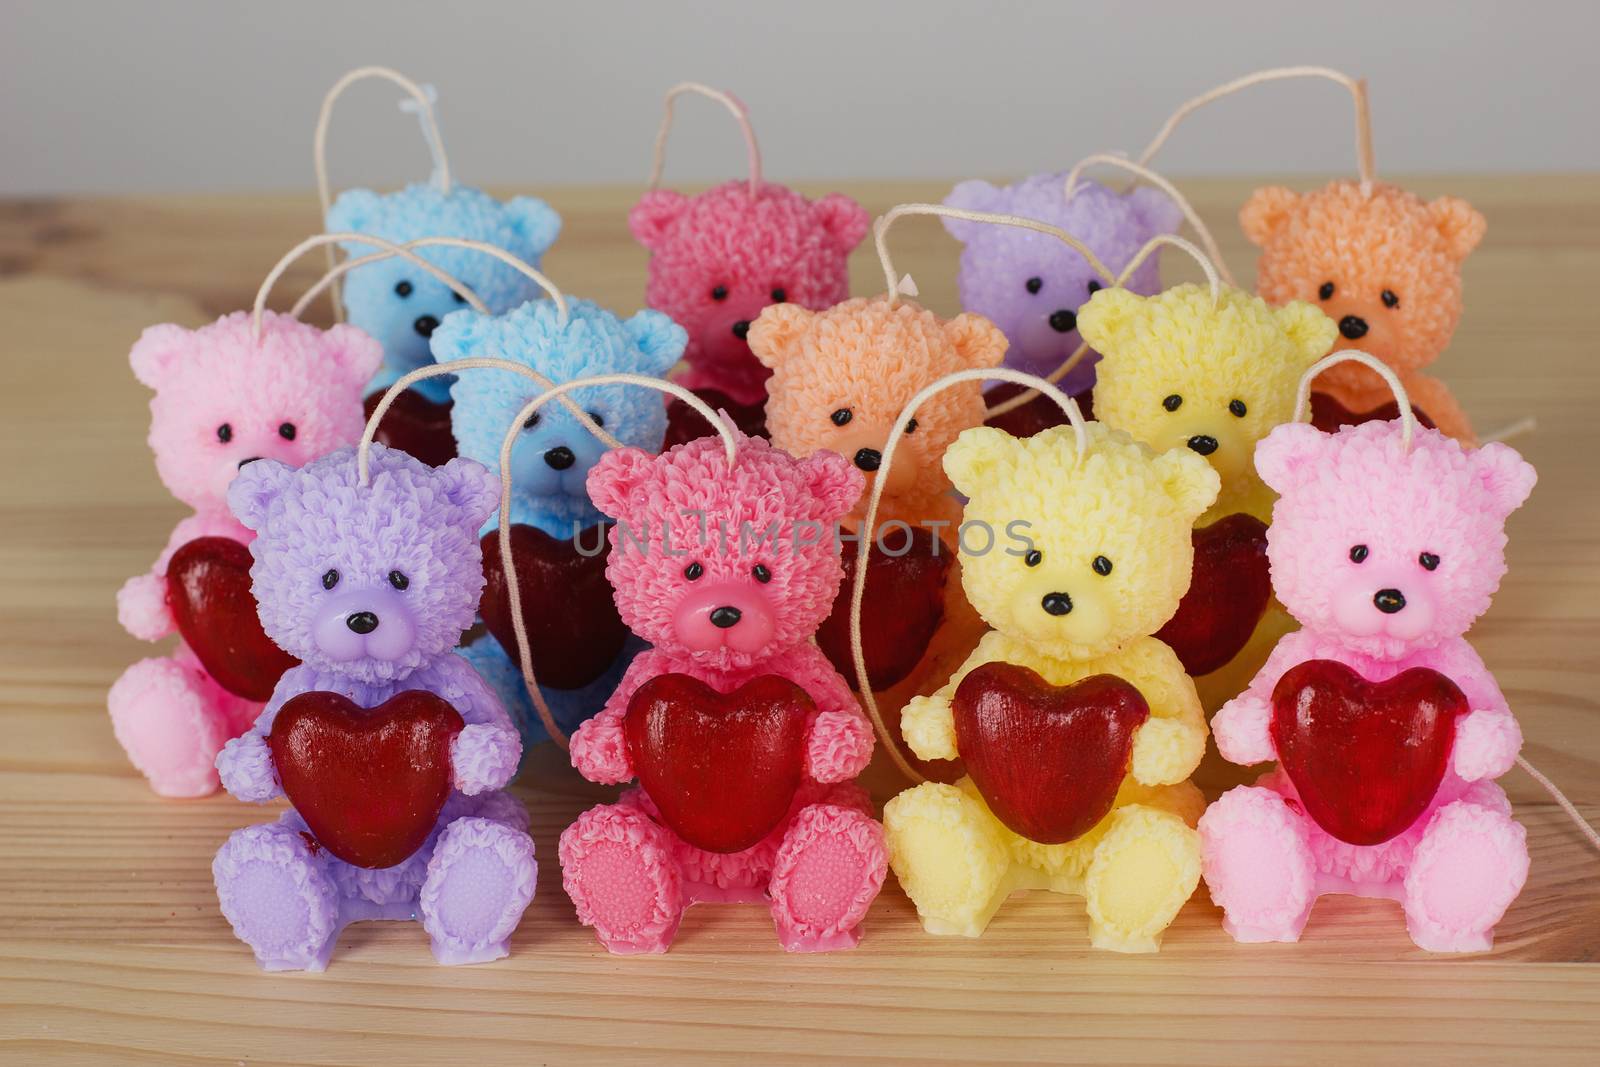 Funny Souvenir gift candles in the shape of teddy-bear with red heart. St. valentine's day.